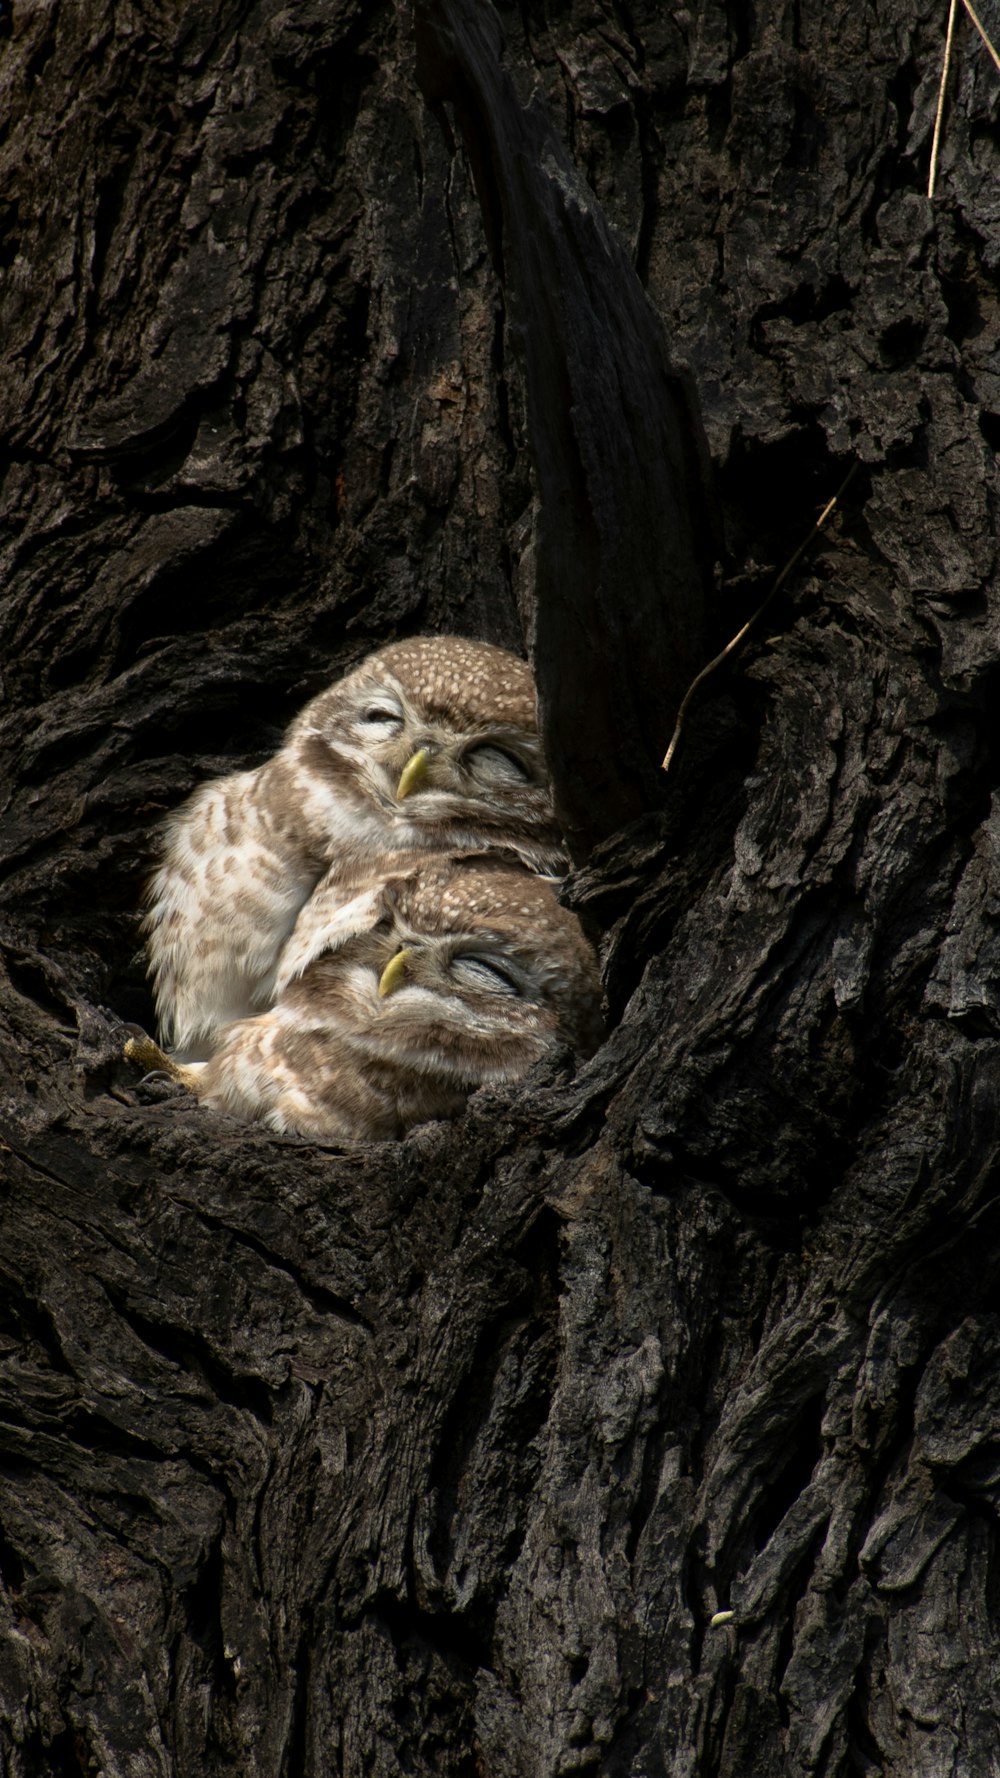 brown owlets in nest